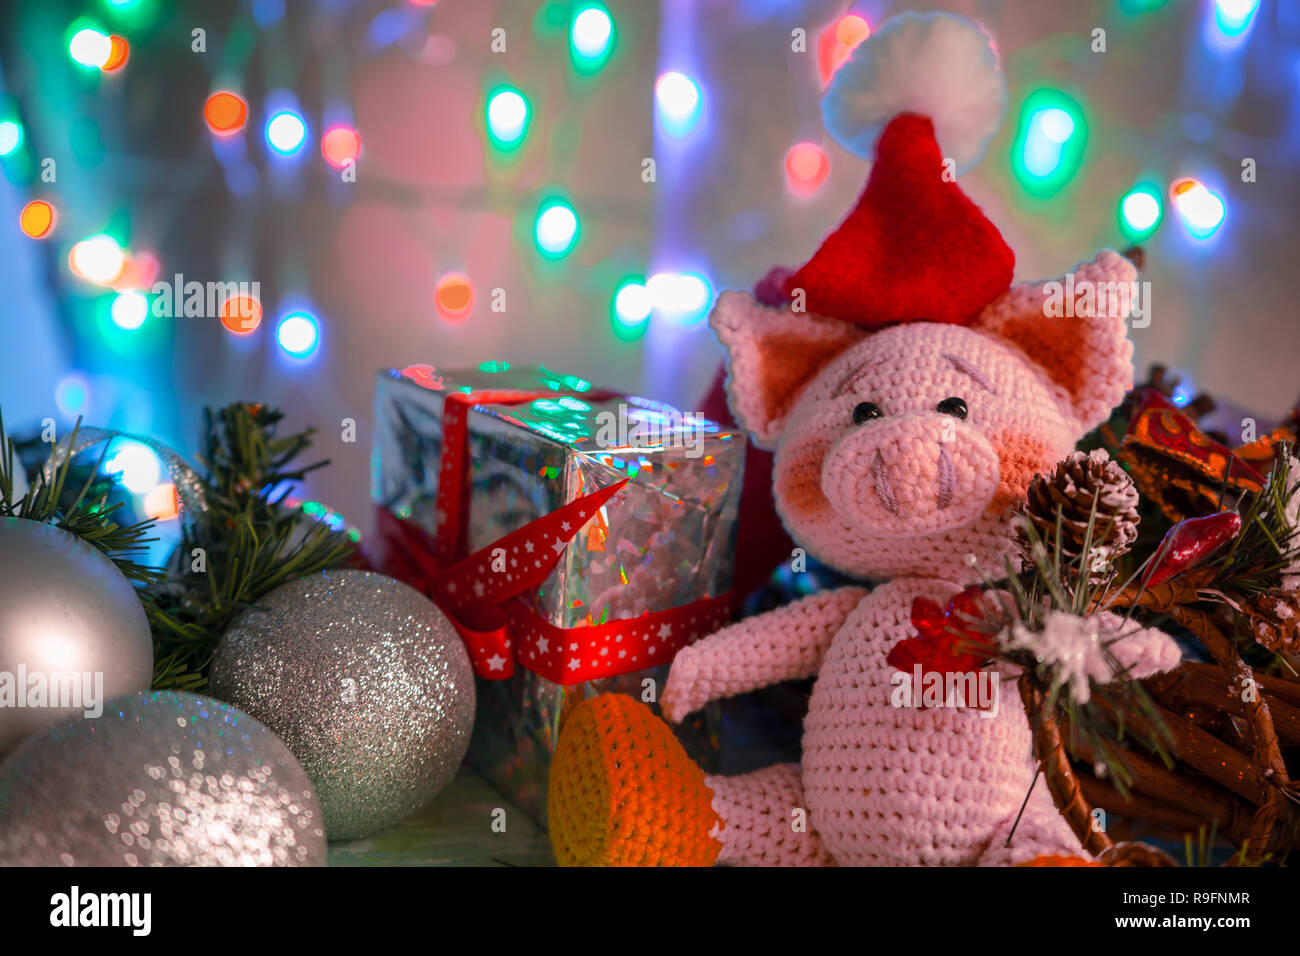 Funny greeting card with new year 2019. Pink pig with xmas balls, gift and cone on background with illumination. Stock Photo